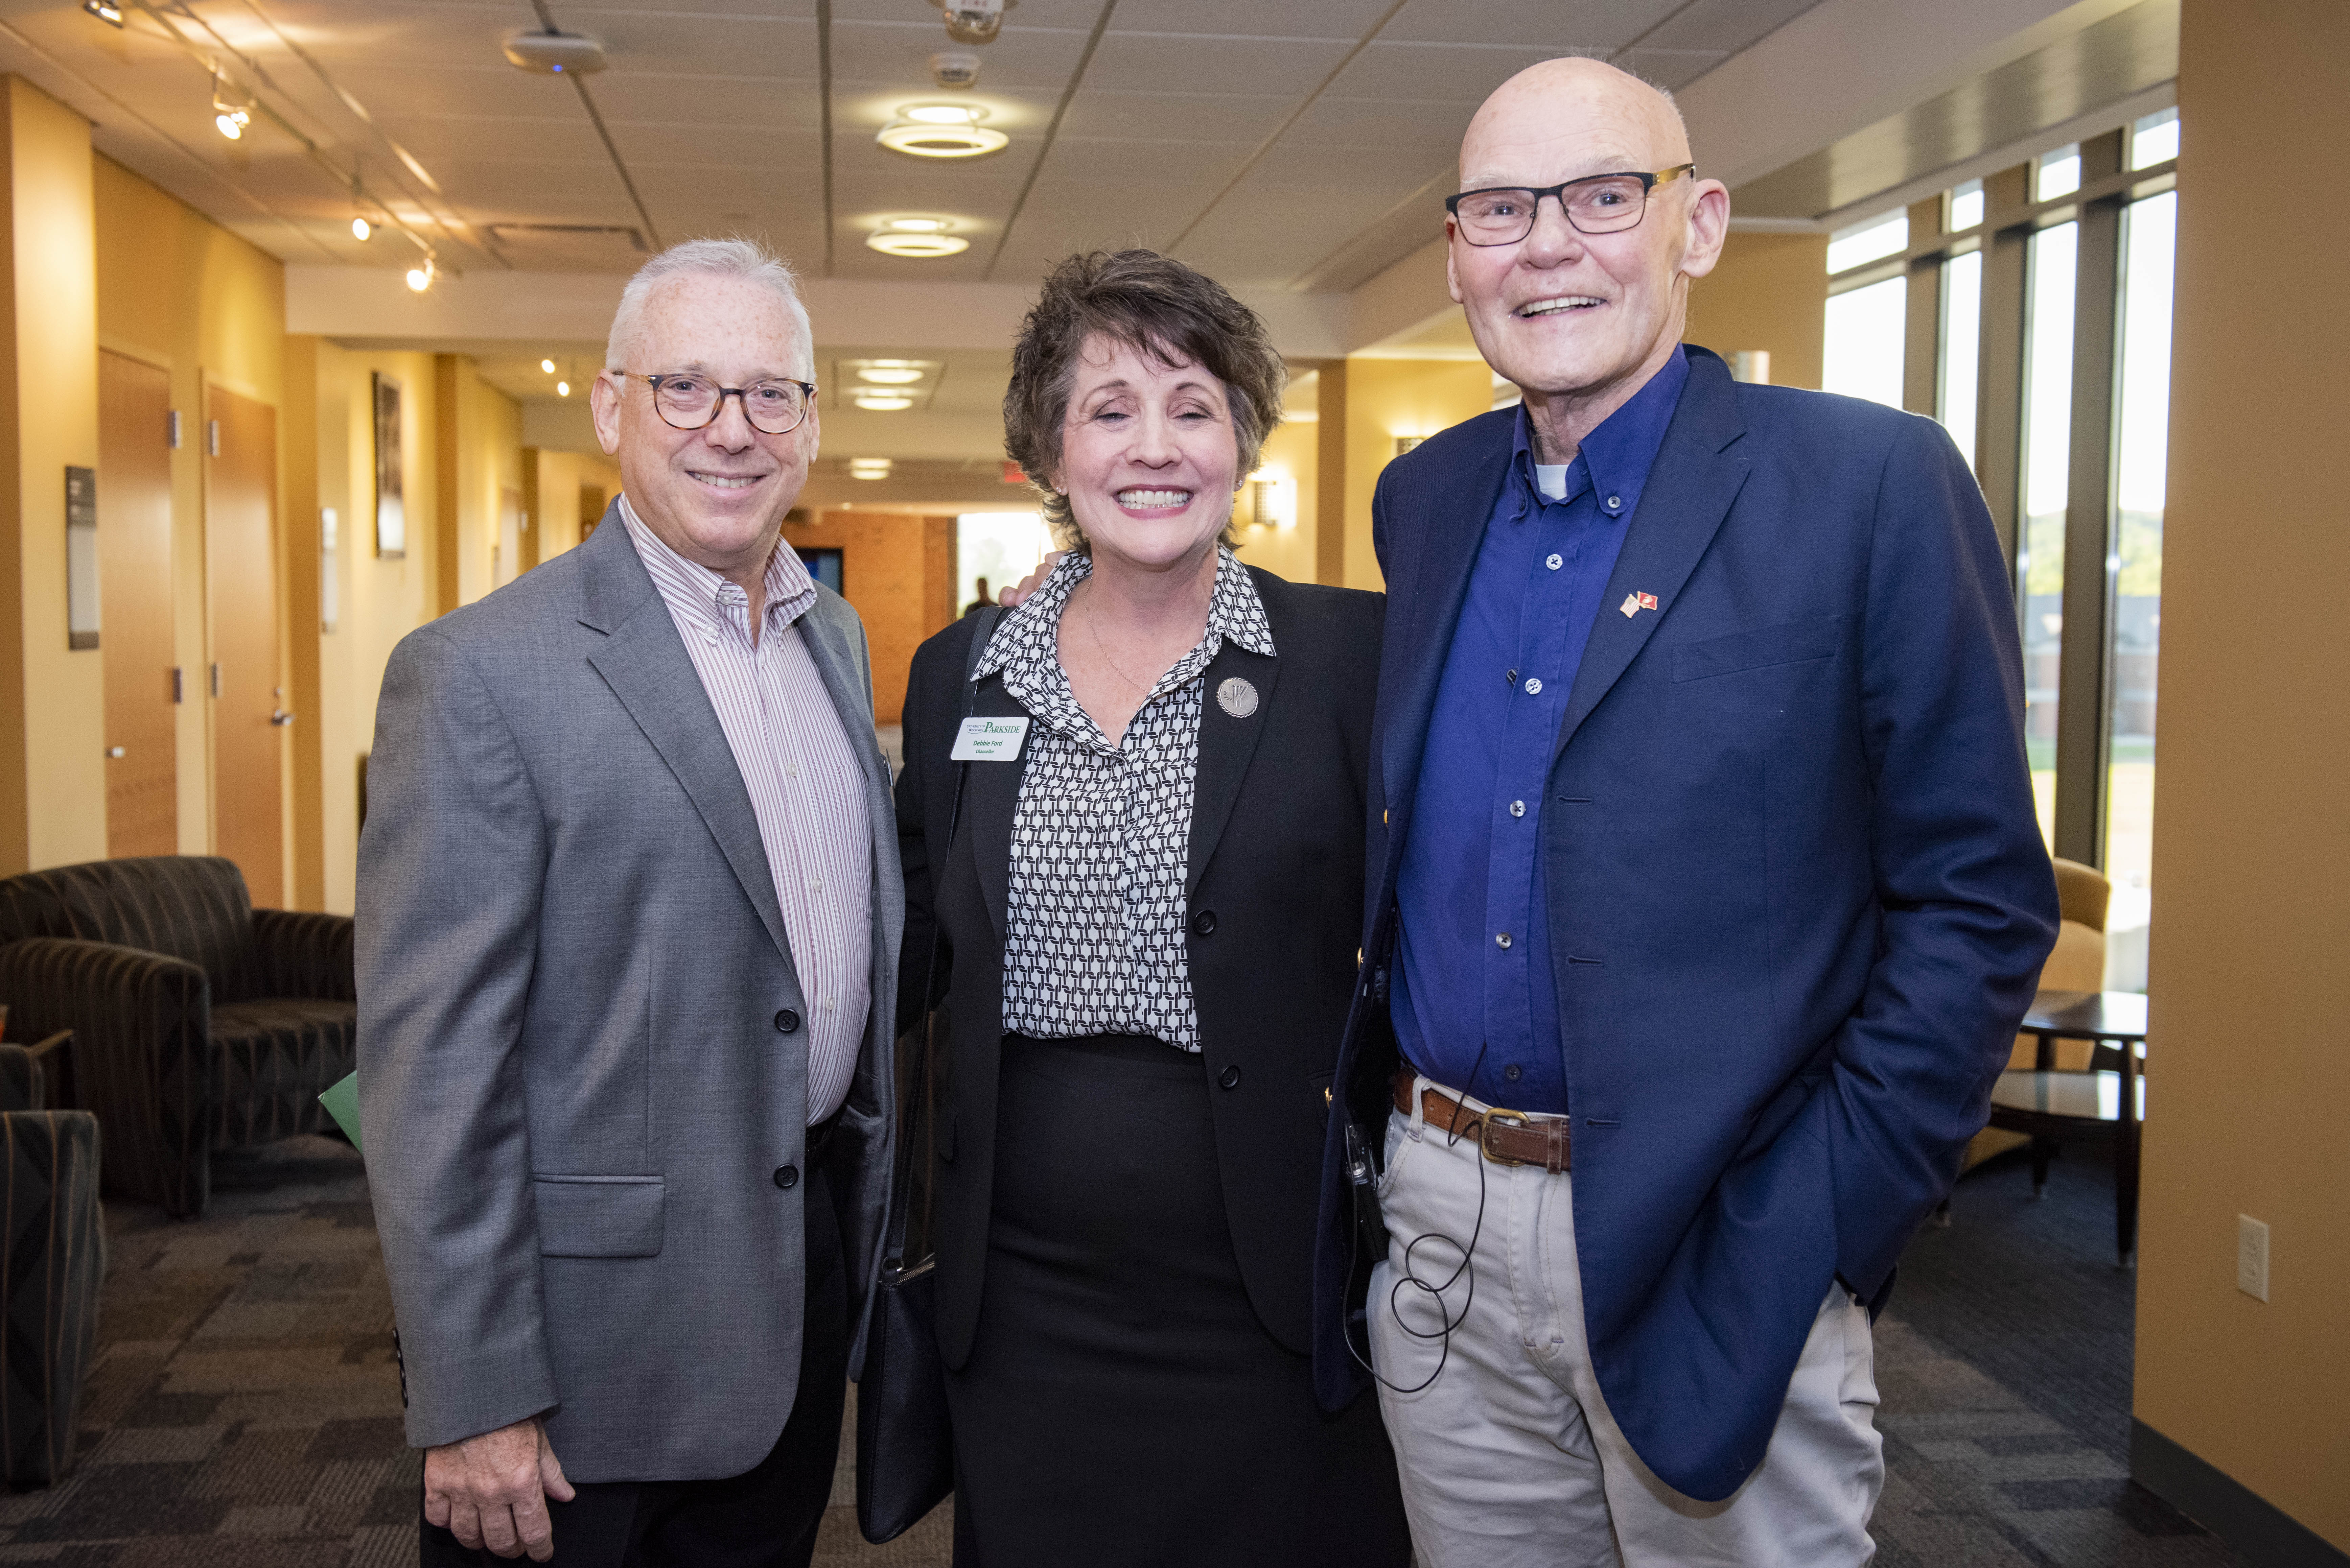 An Evening with James Carville and Mary Matalin